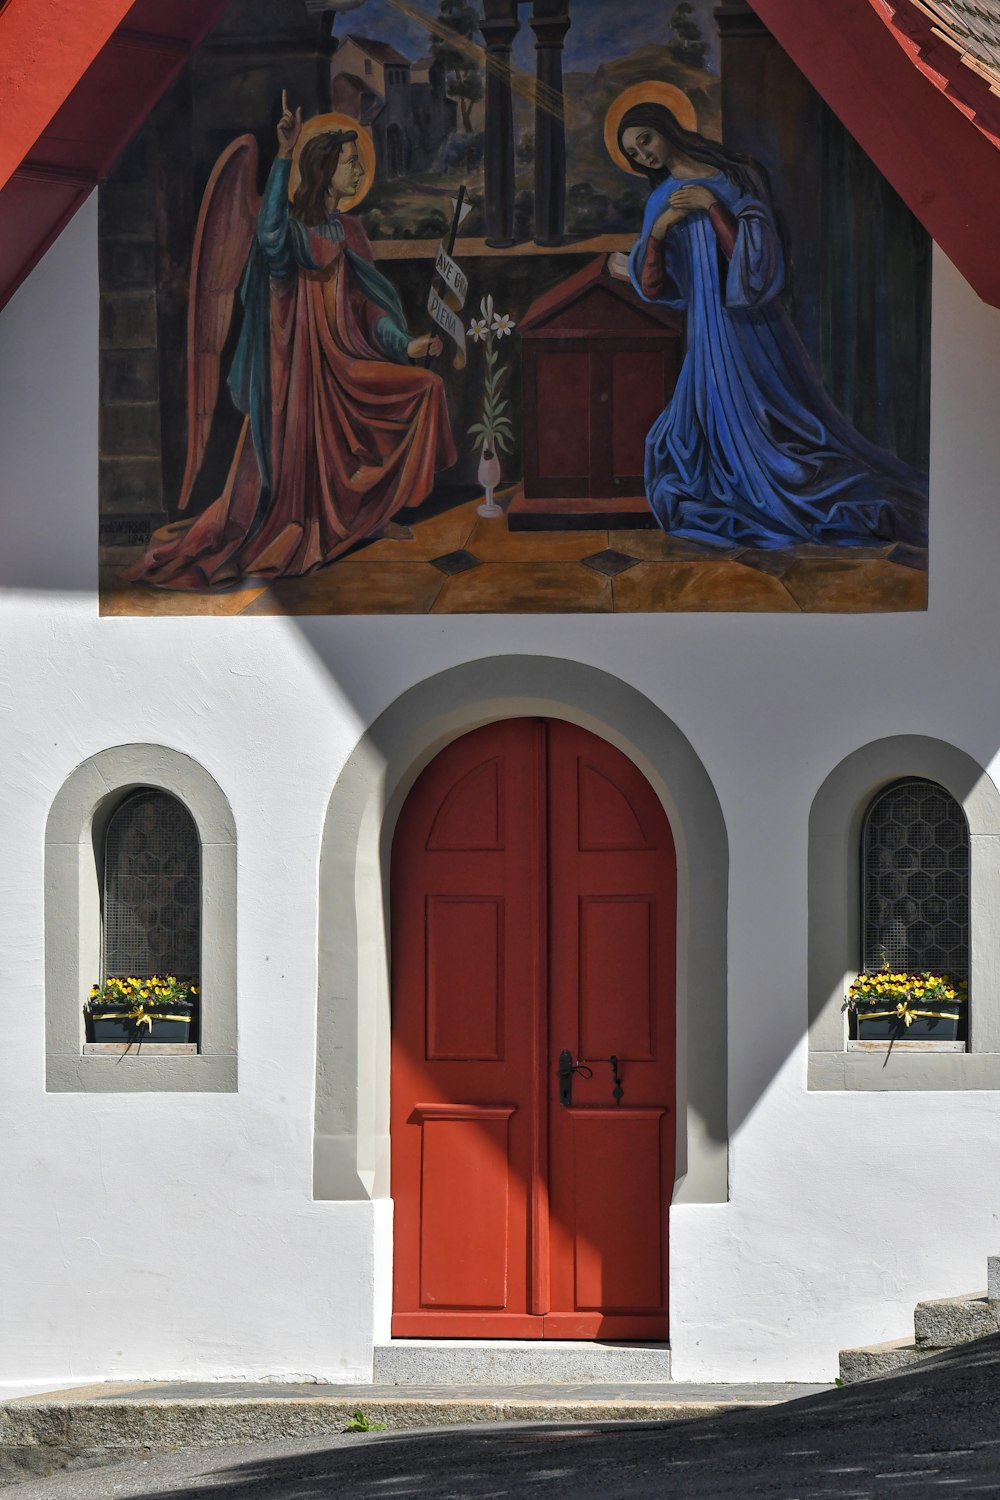 a painting on the side of a building with a red door